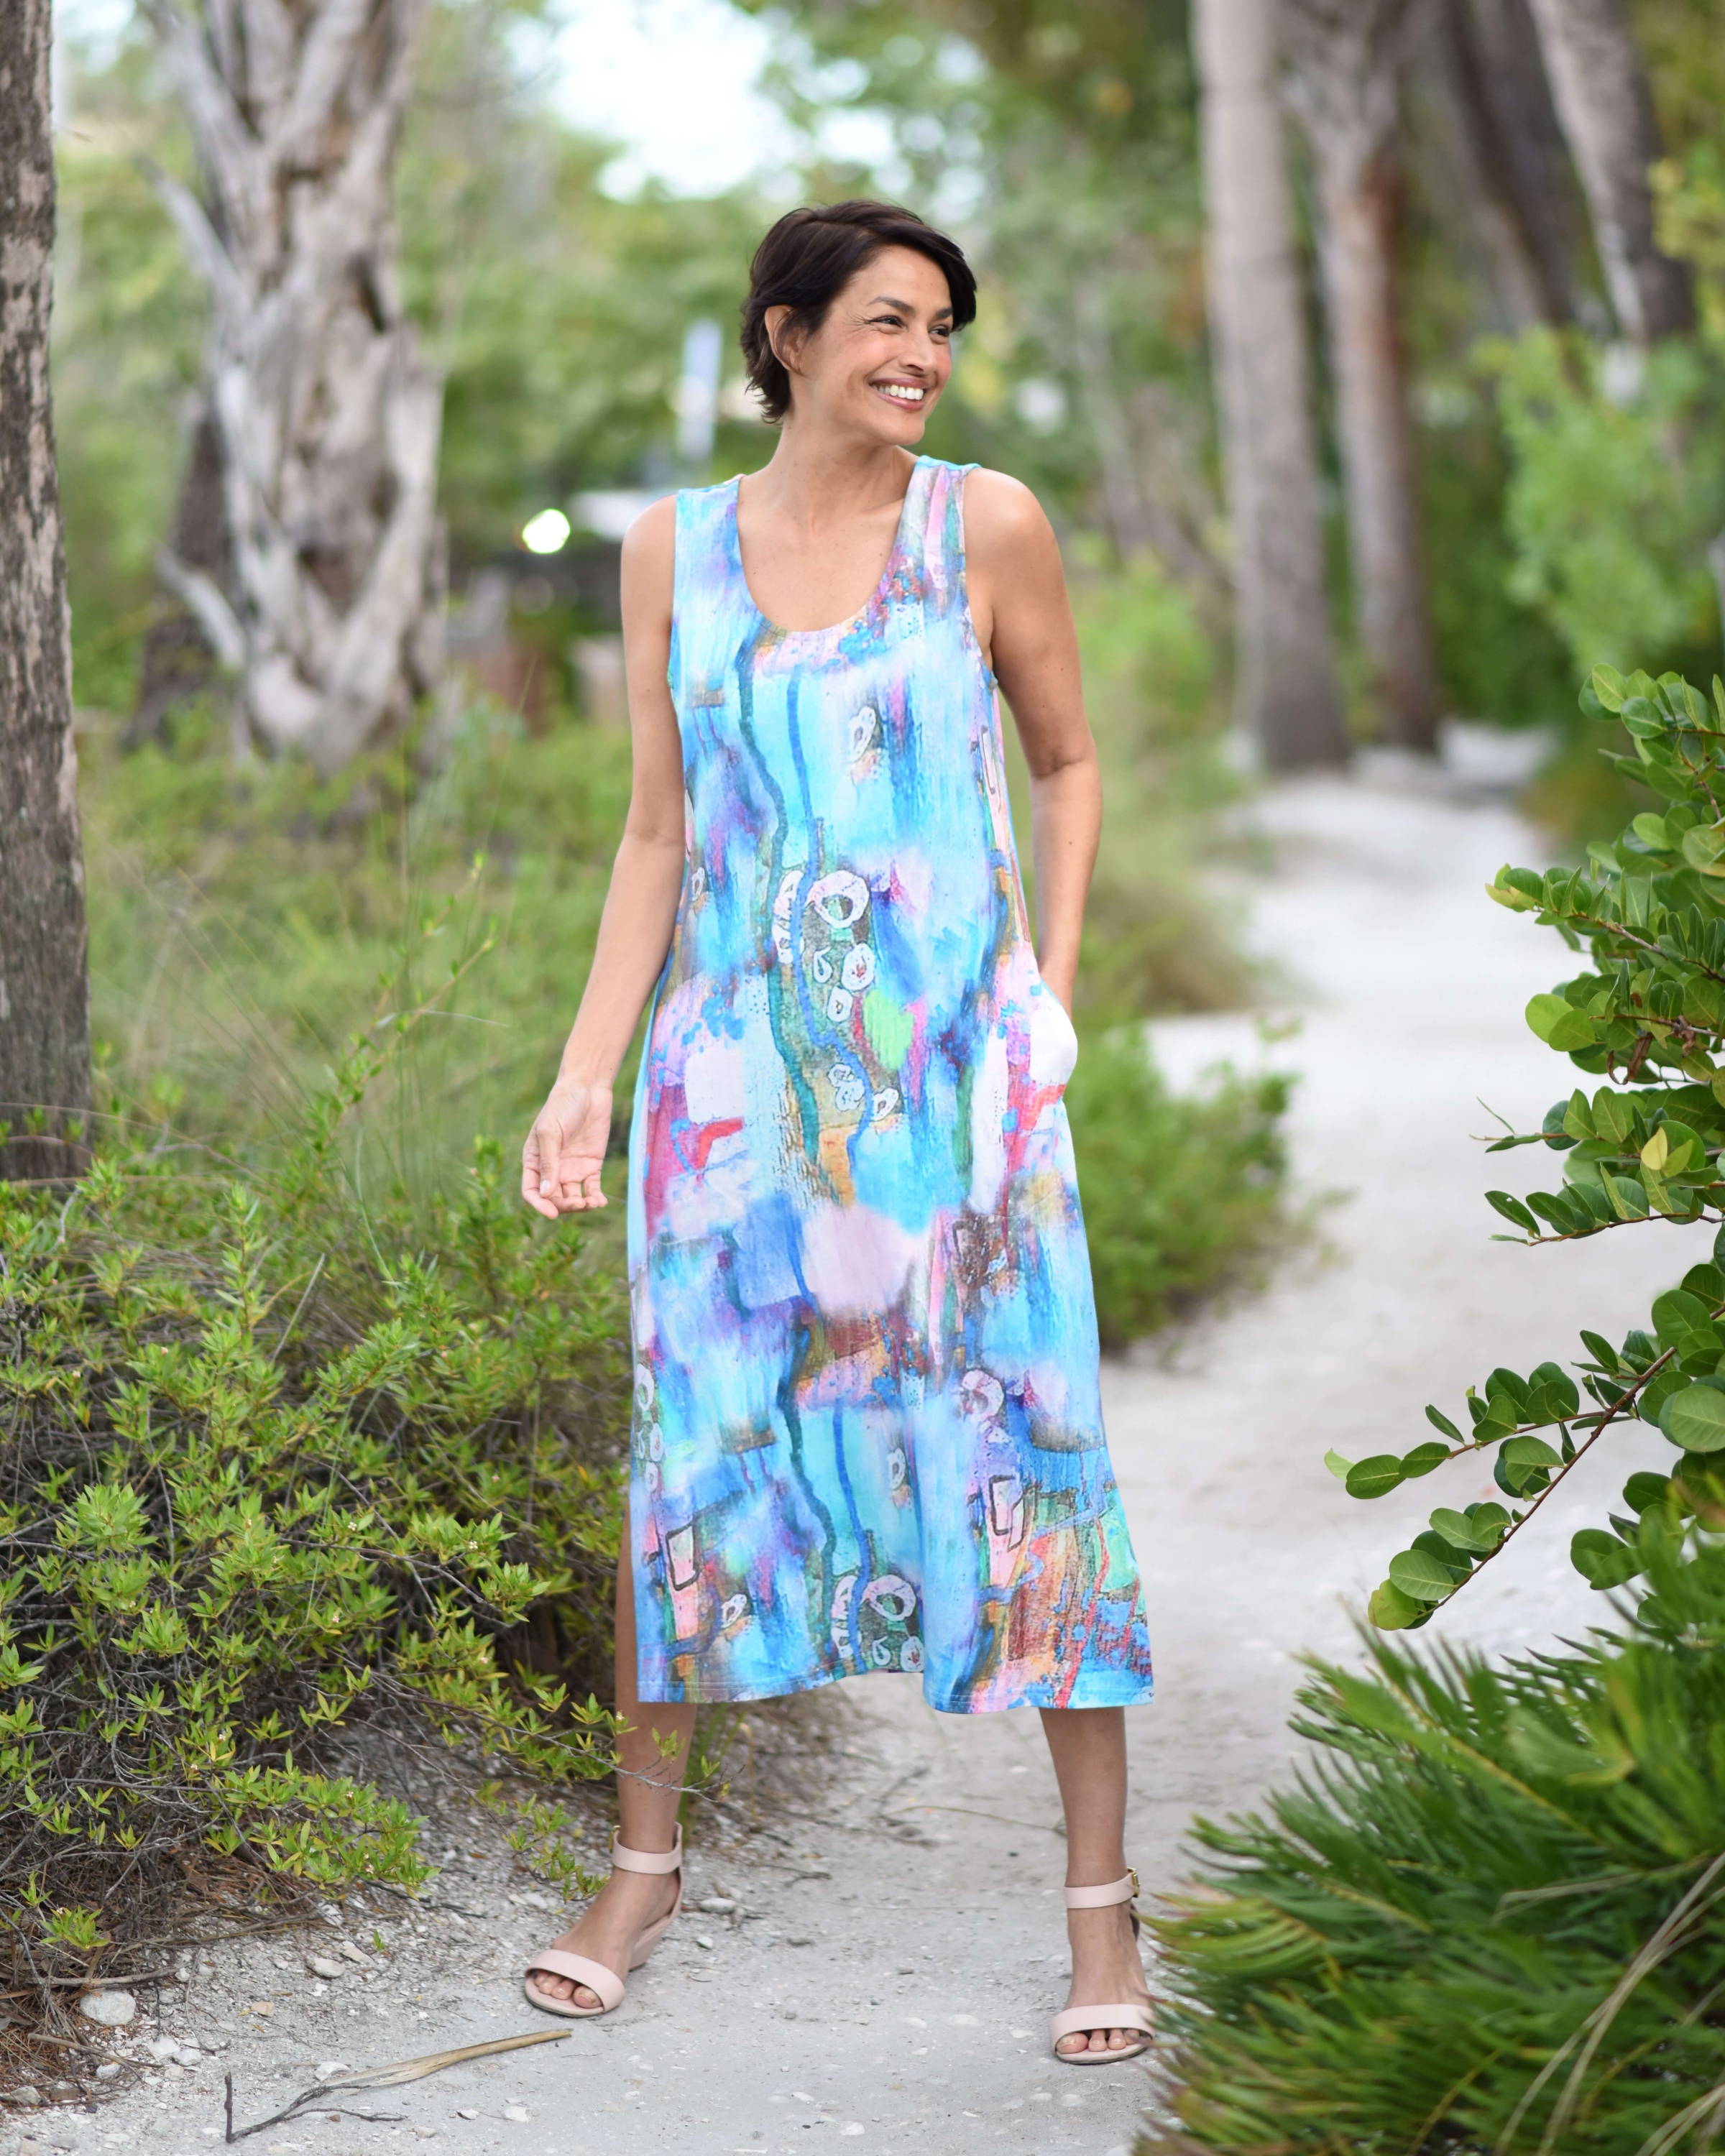 A smiling woman with short dark hair wearing a sleeveless pastel-colored dress walks along a nature path. . 